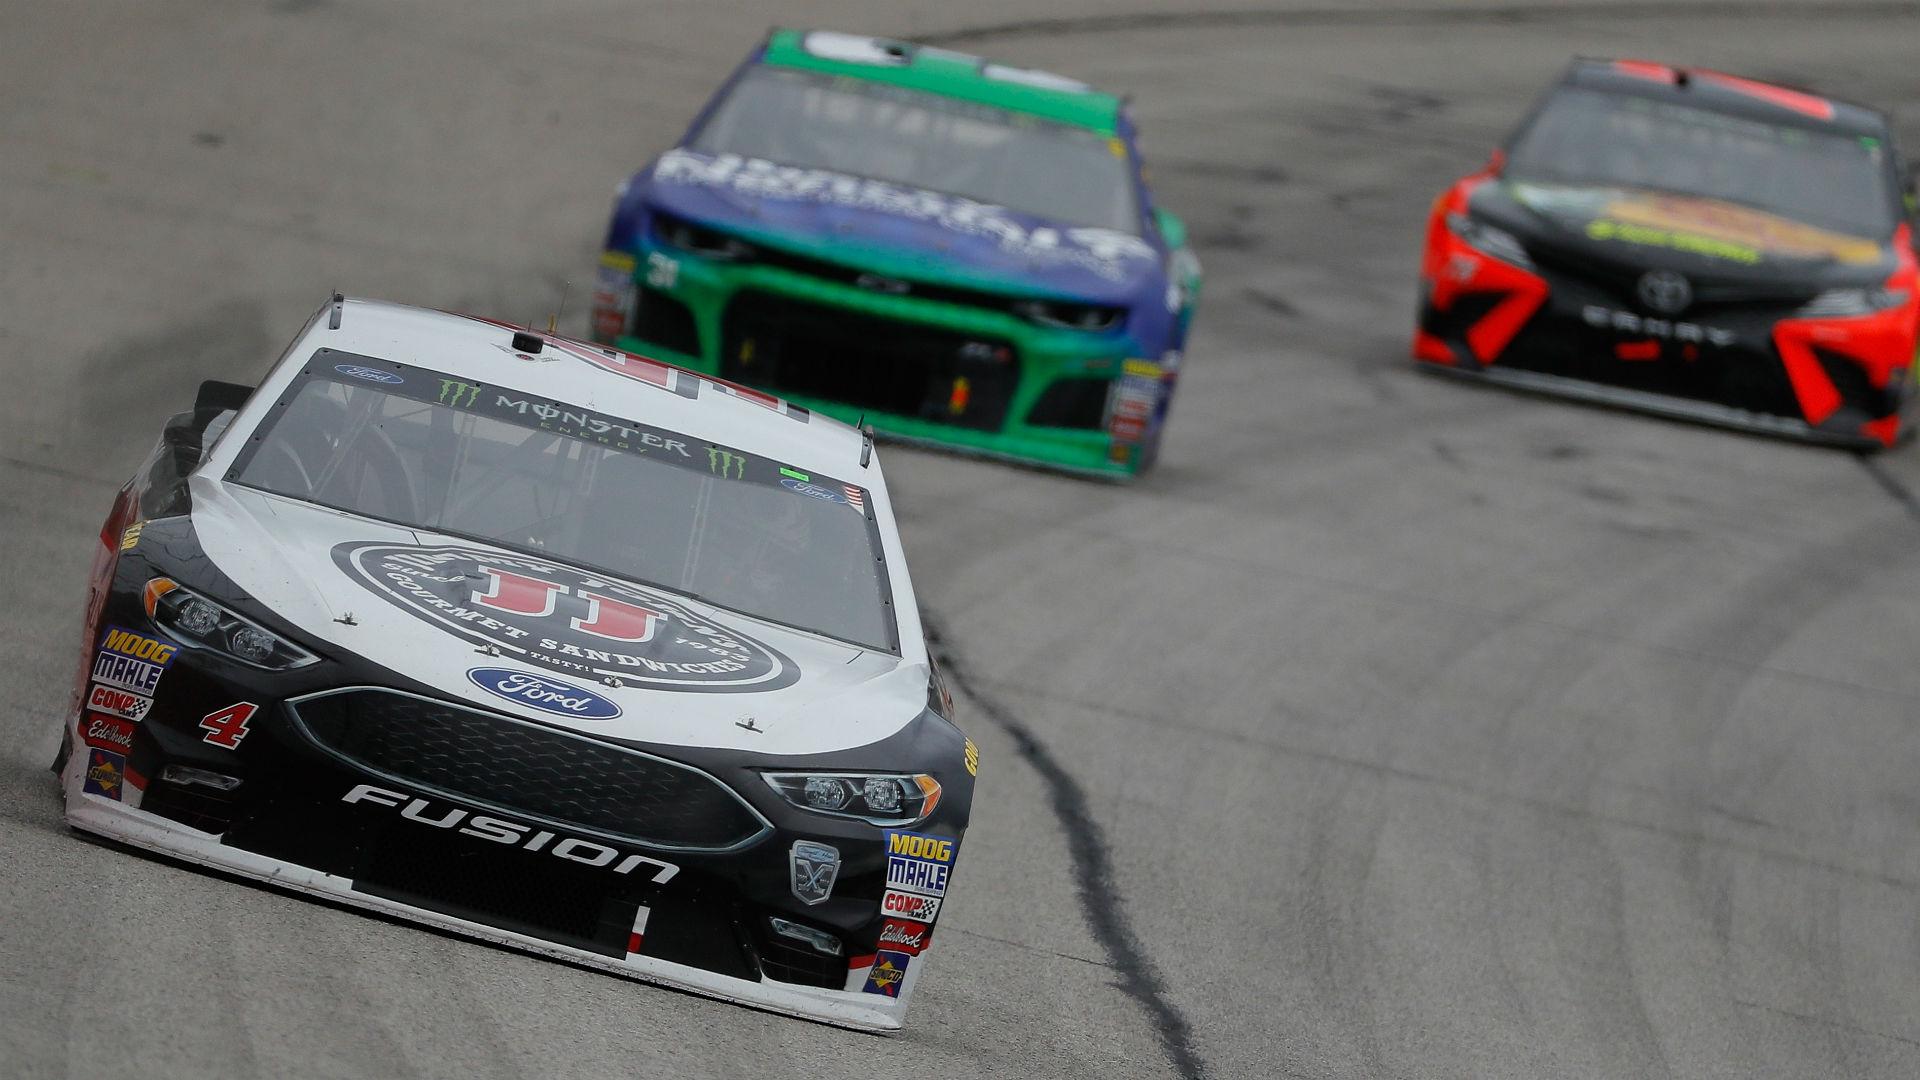 Kevin Harvick's crew chief fined for violation in Atlanta race